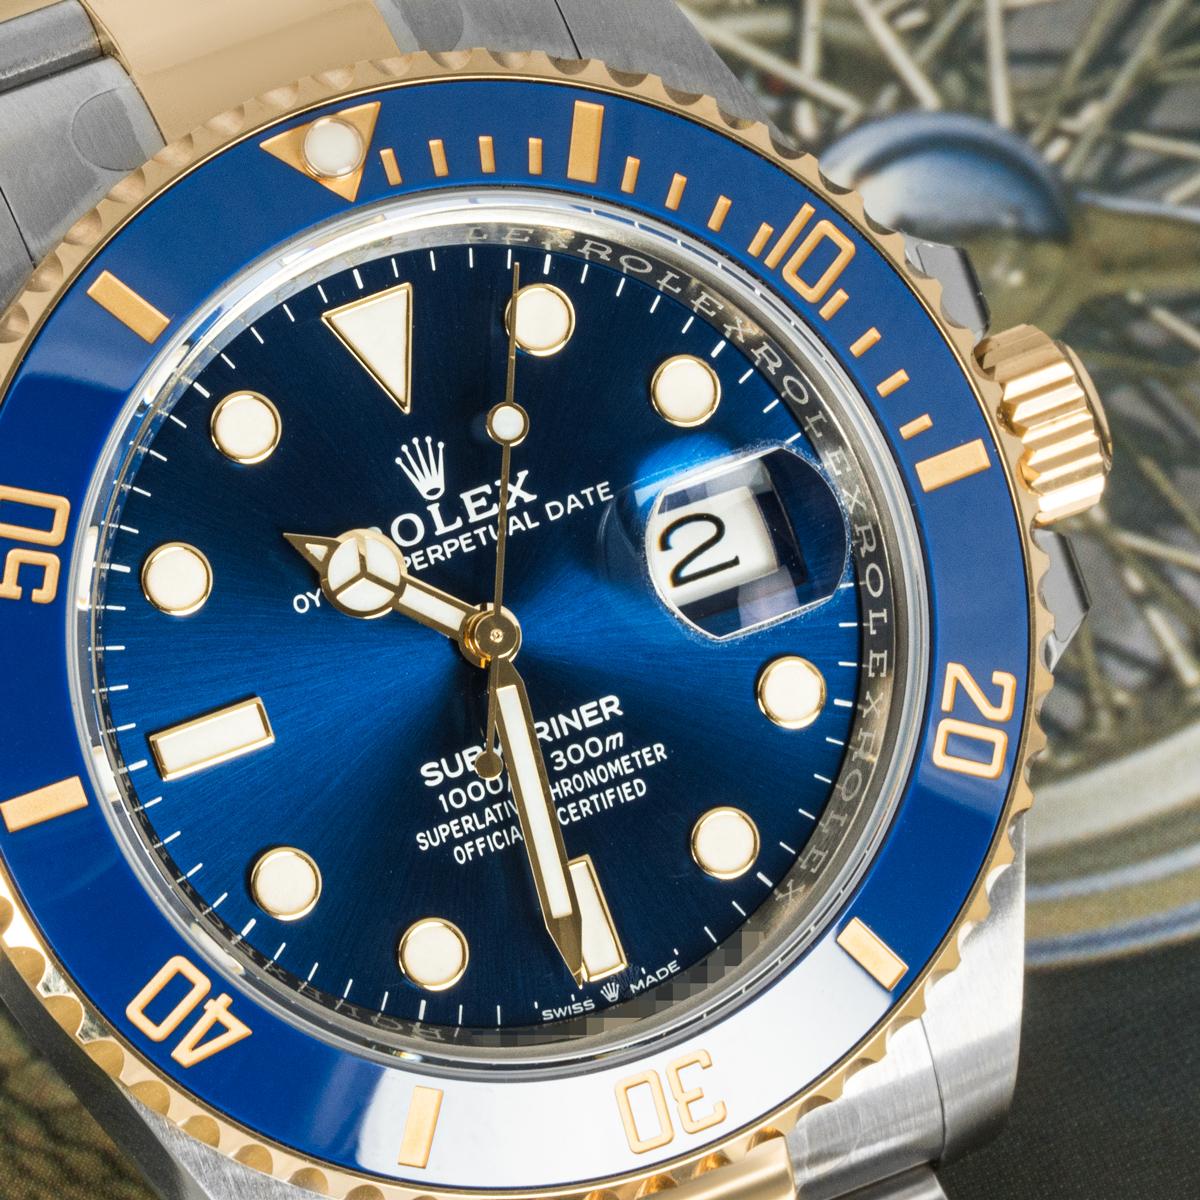 A 41mm Submariner Date, in Oystersteel and yellow gold by Rolex. Featuring a blue dial, this 126613LB also features a yellow gold uni-directional rotatable bezel with a blue ceramic insert.

The Oyster bracelet comes with a folding Oysterlock clasp